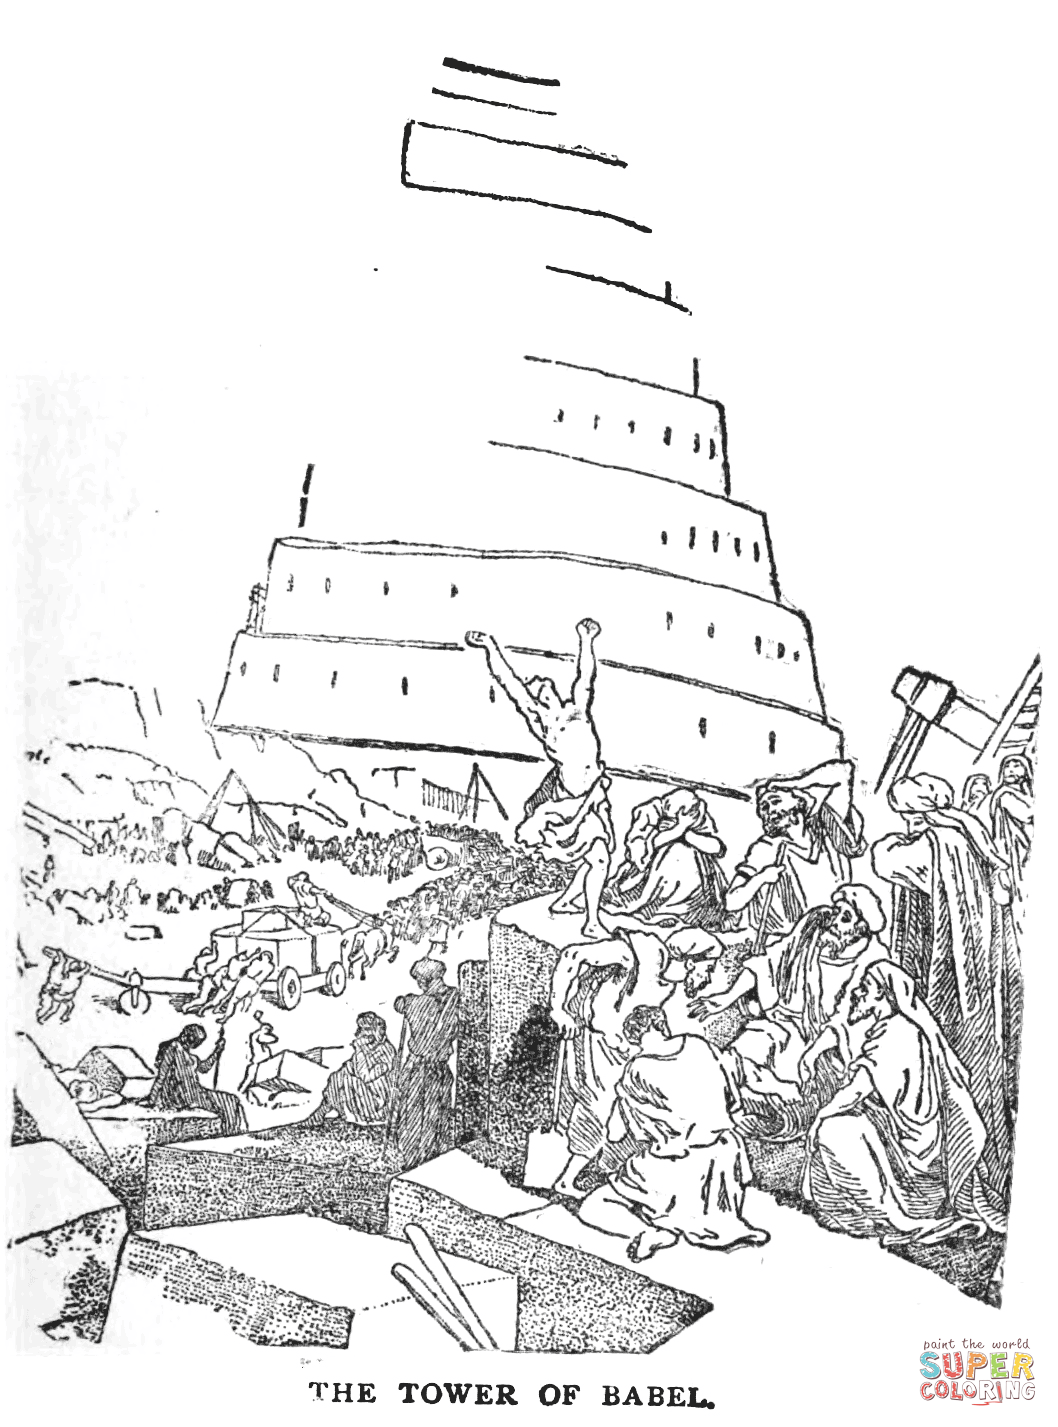 The tower of babel coloring page free printable coloring pages